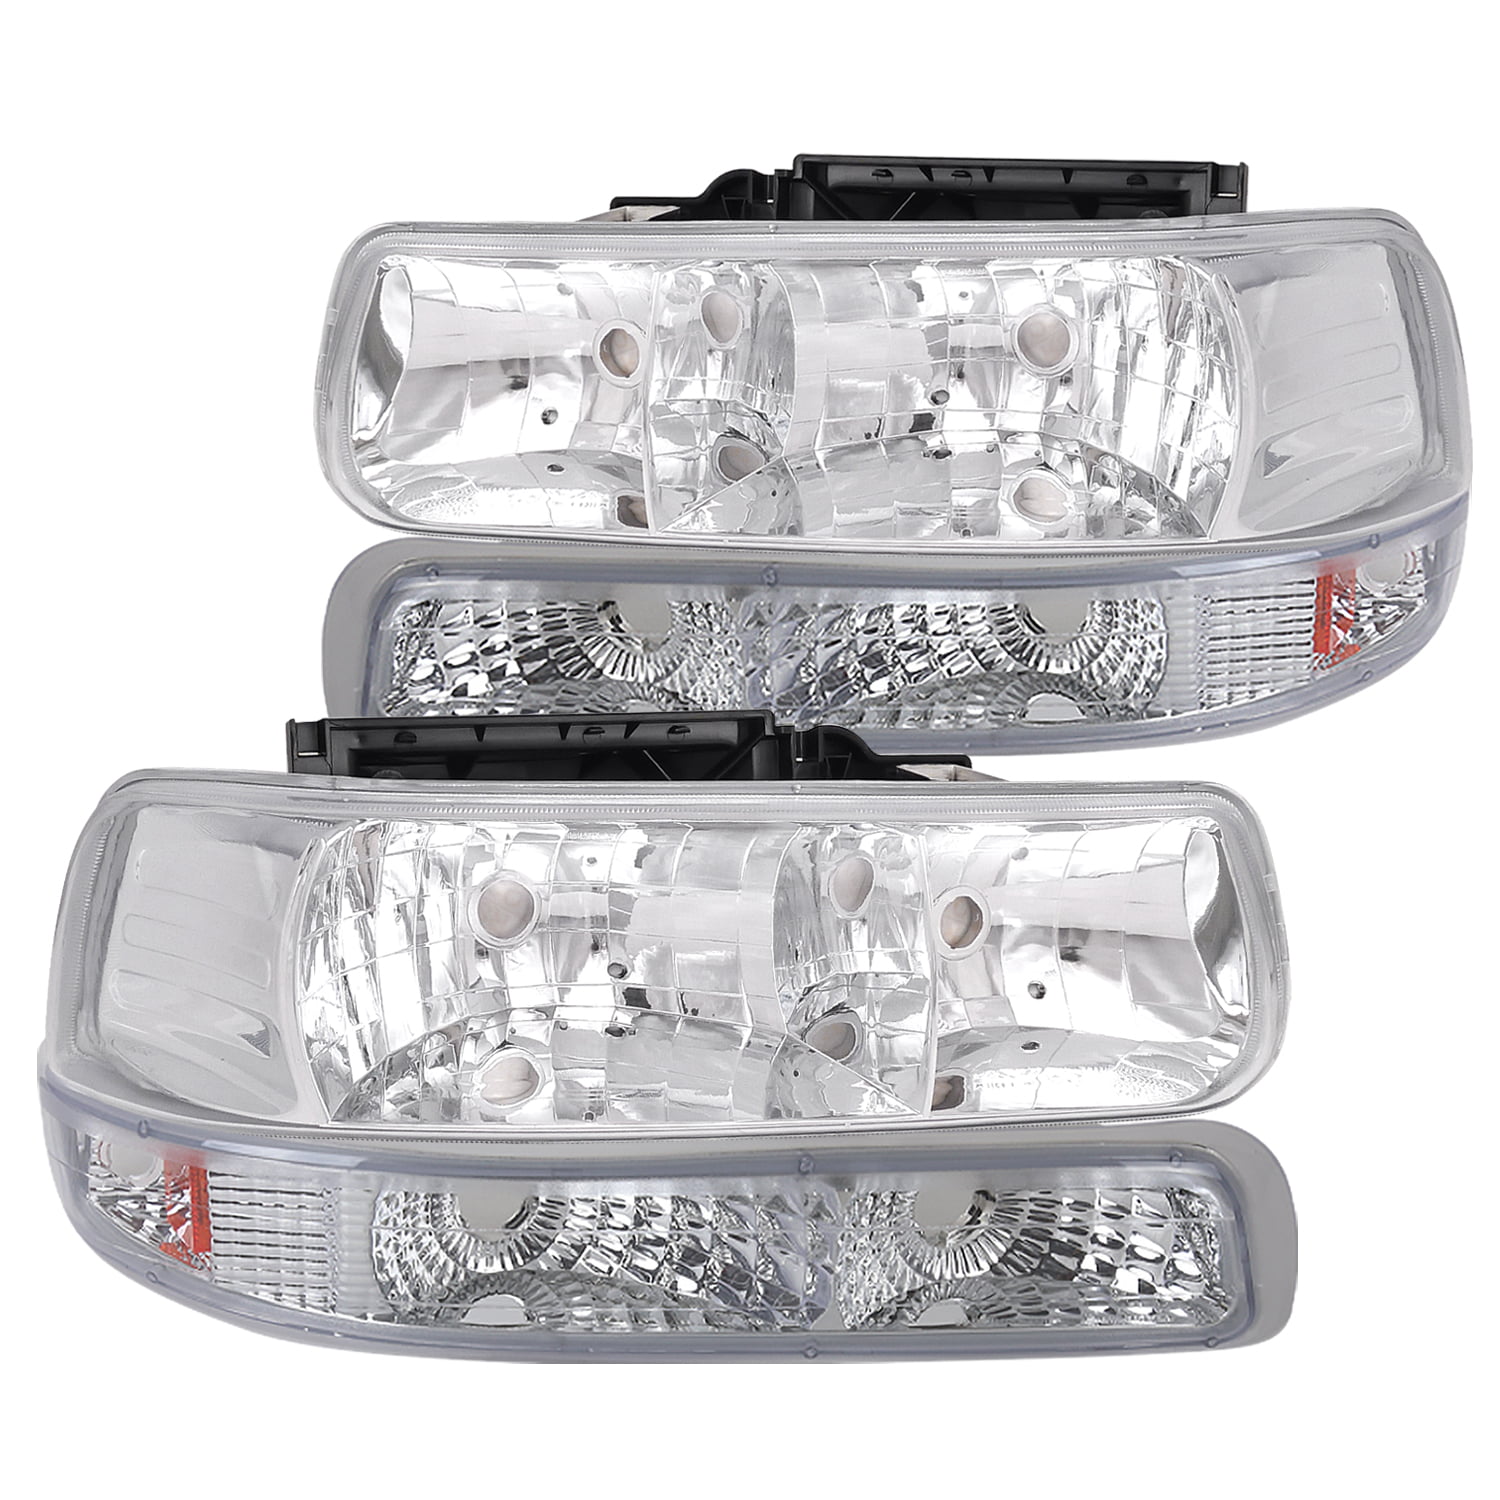 Spec-D Tuning Chrome Housing Clear Lens Bumper Lights for 1999-2002 Chevy Silverado 2000-2006 Tahoe Turn Signal Lamps Left Right Pair 